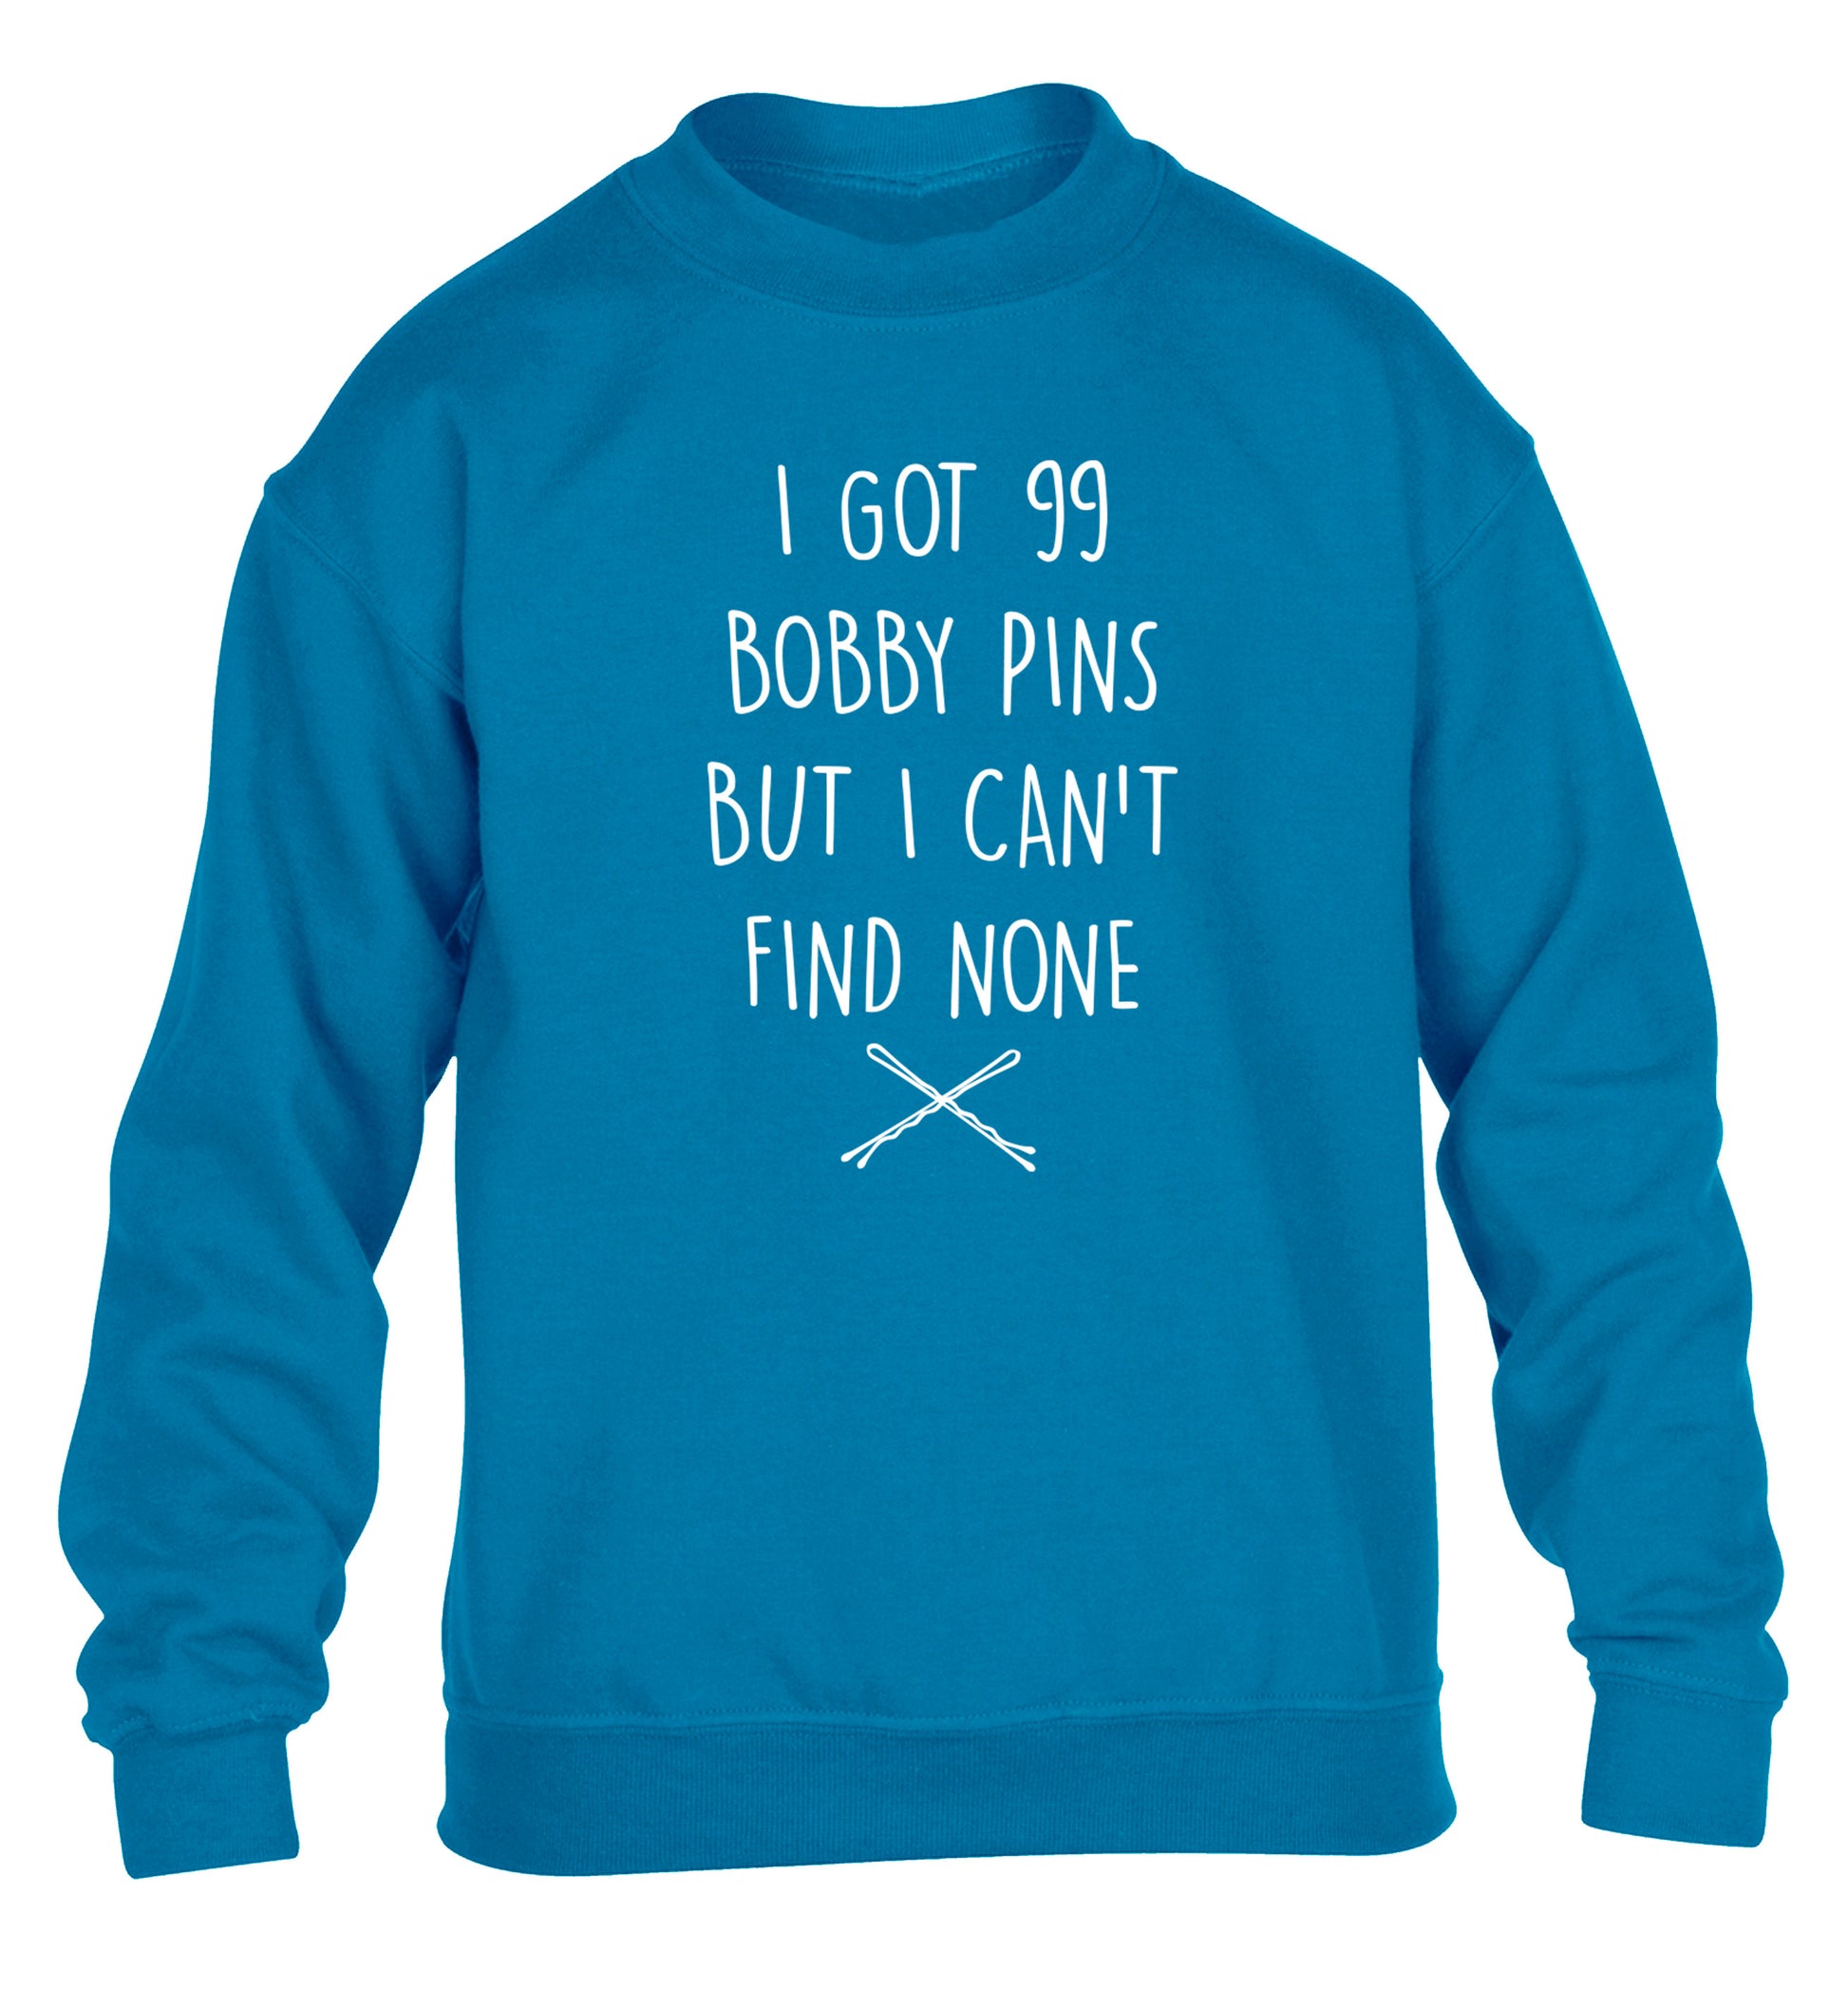 I got 99 bobby pins but I can't find none children's blue sweater 12-14 Years